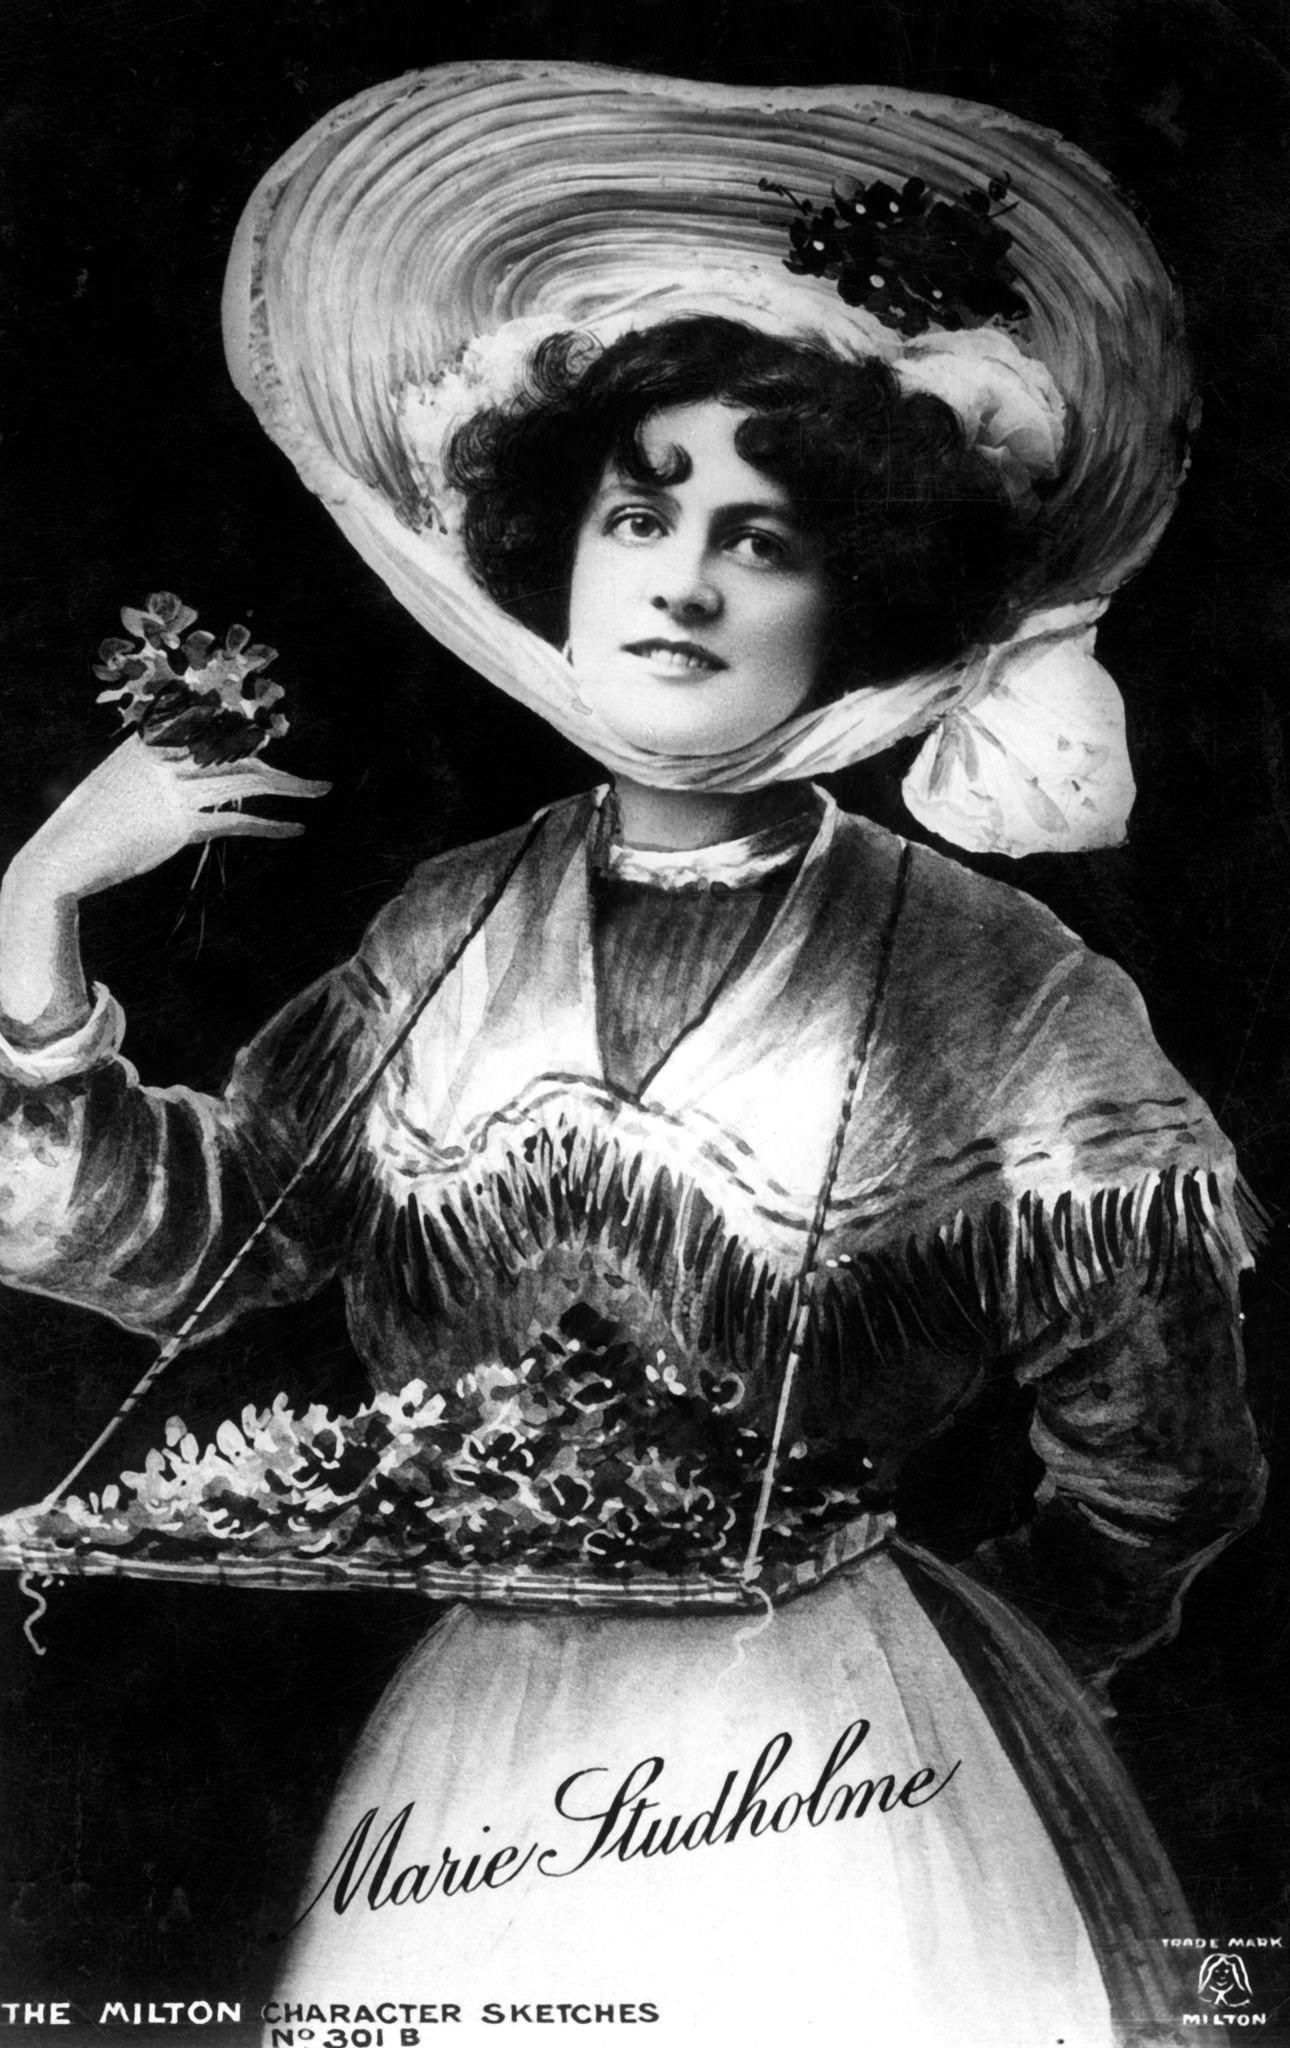 Marie Studholme poses elegantly for a portrait in the early 1900s